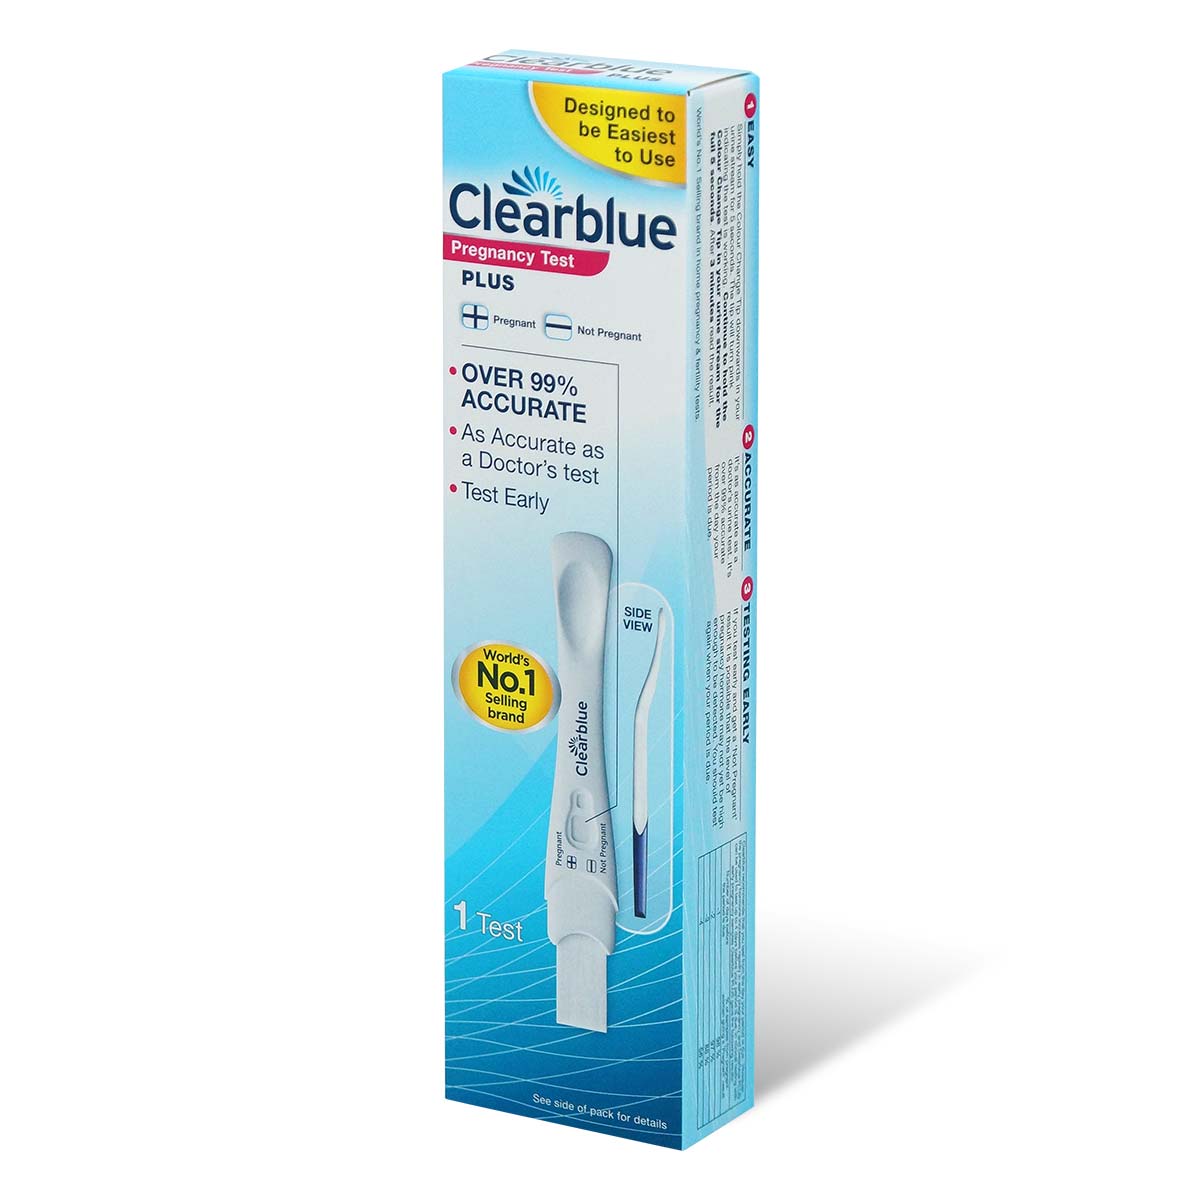 Clearblue PLUS Pregnancy Test-p_1